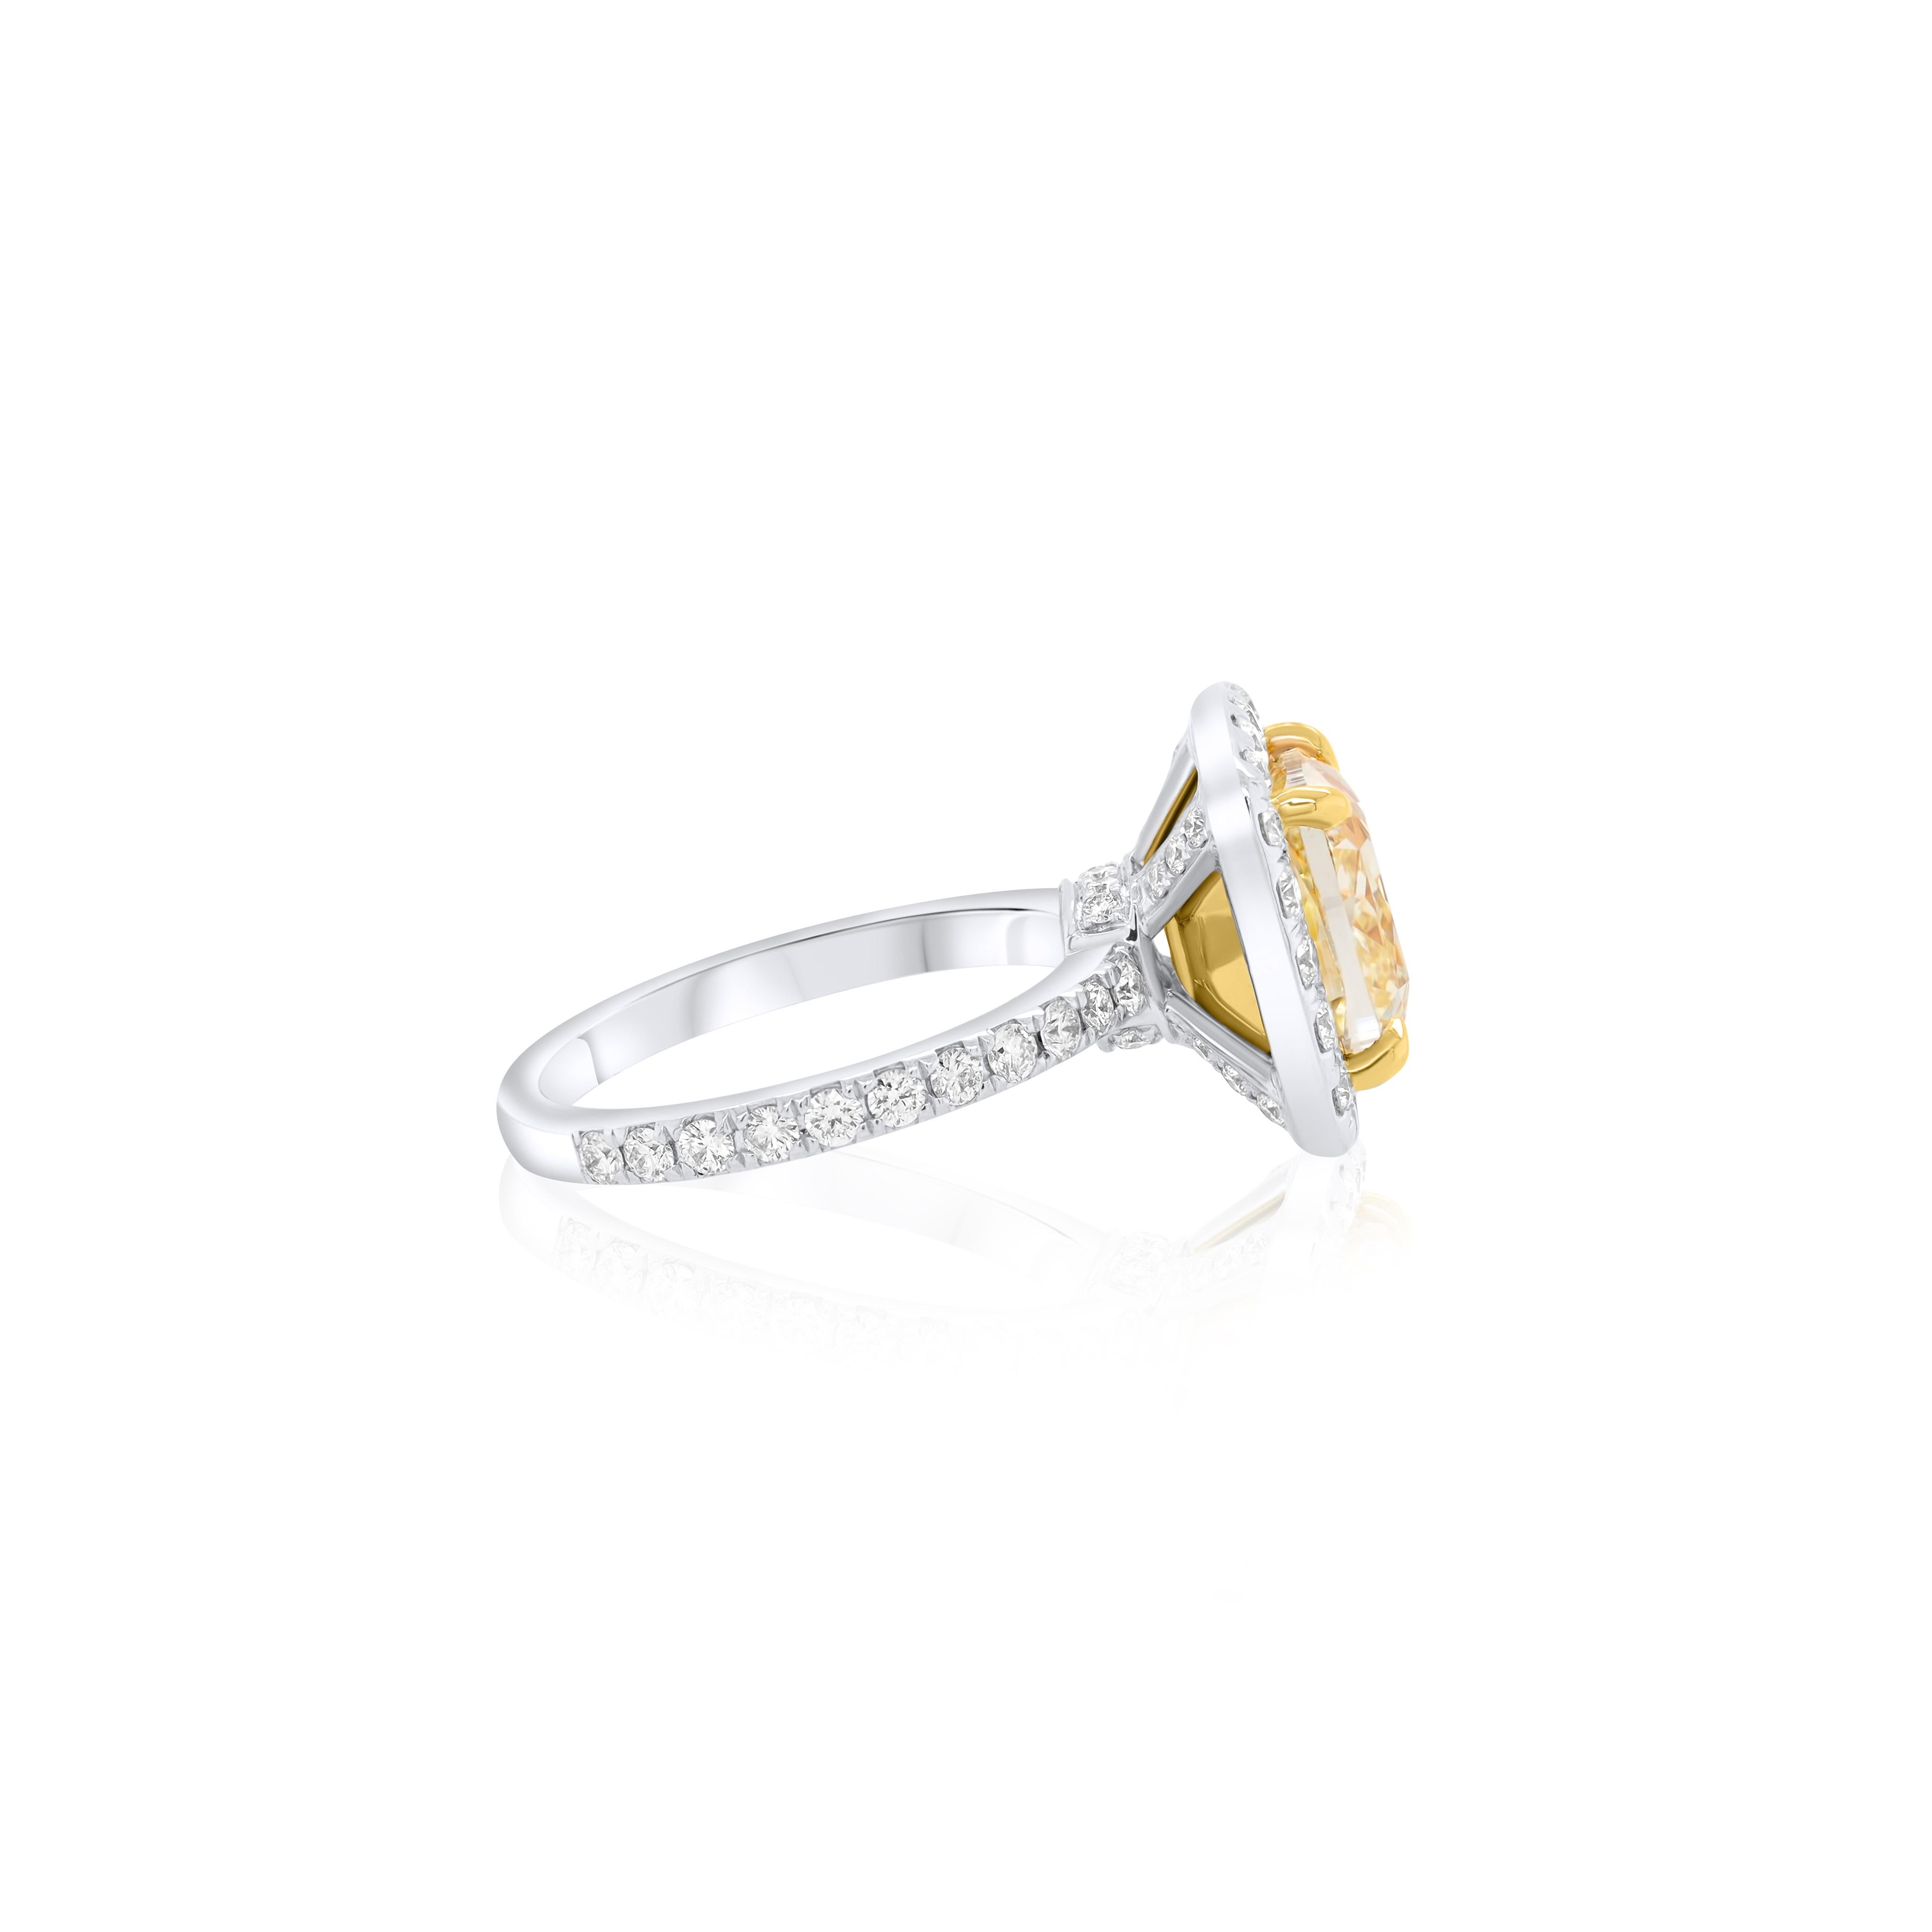 Diana M. 5.01 Carat Fancy Yellow Diamond Platinum Ring In New Condition For Sale In New York, NY